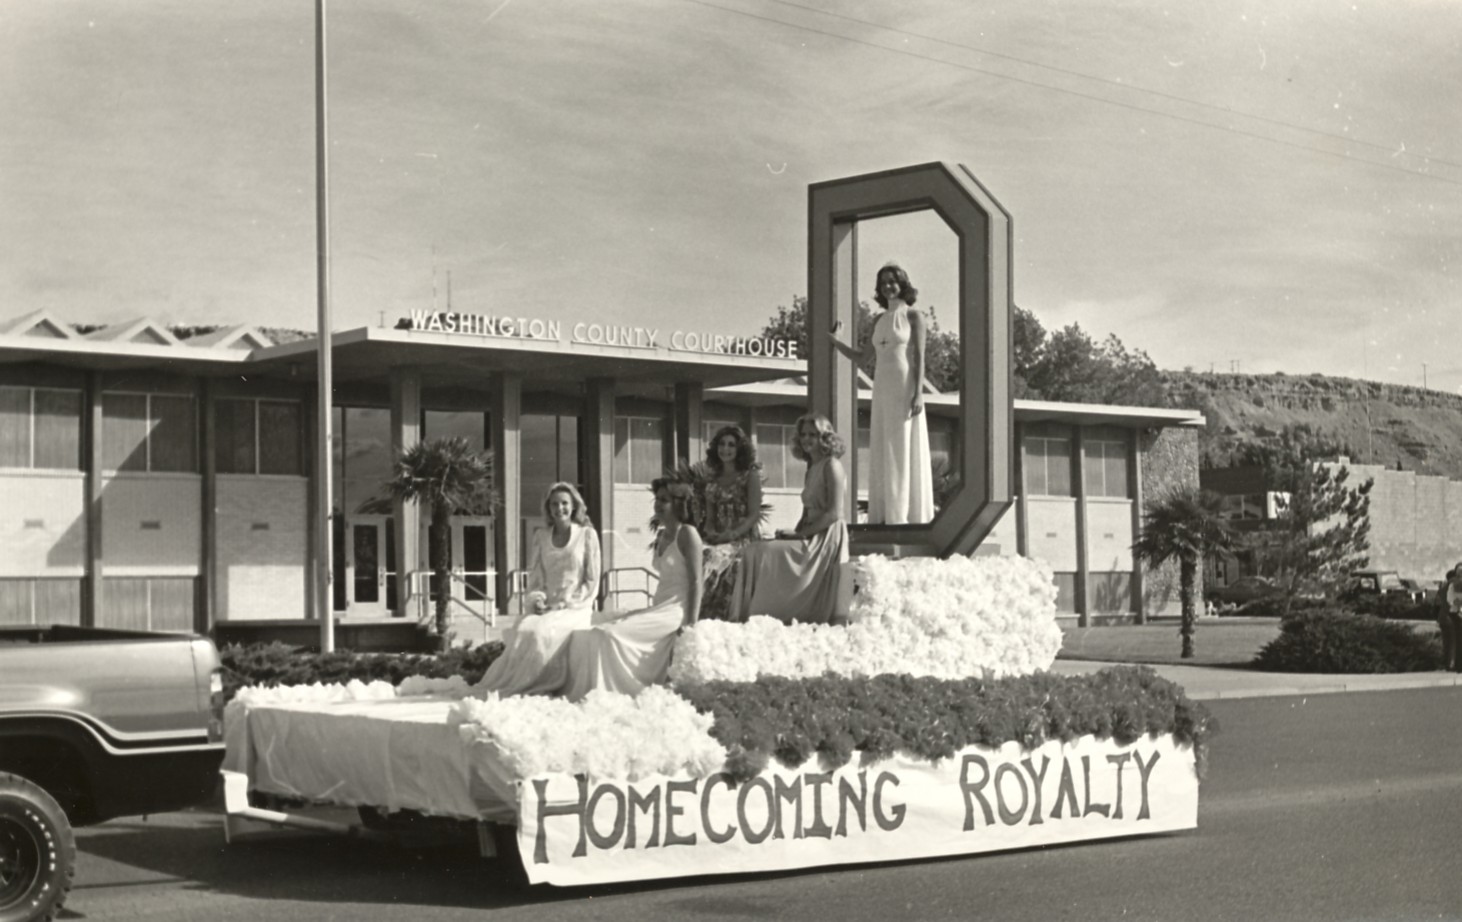 WCHS-00372 A Homecoming Royalty float out in front of the Washington County Courthouse